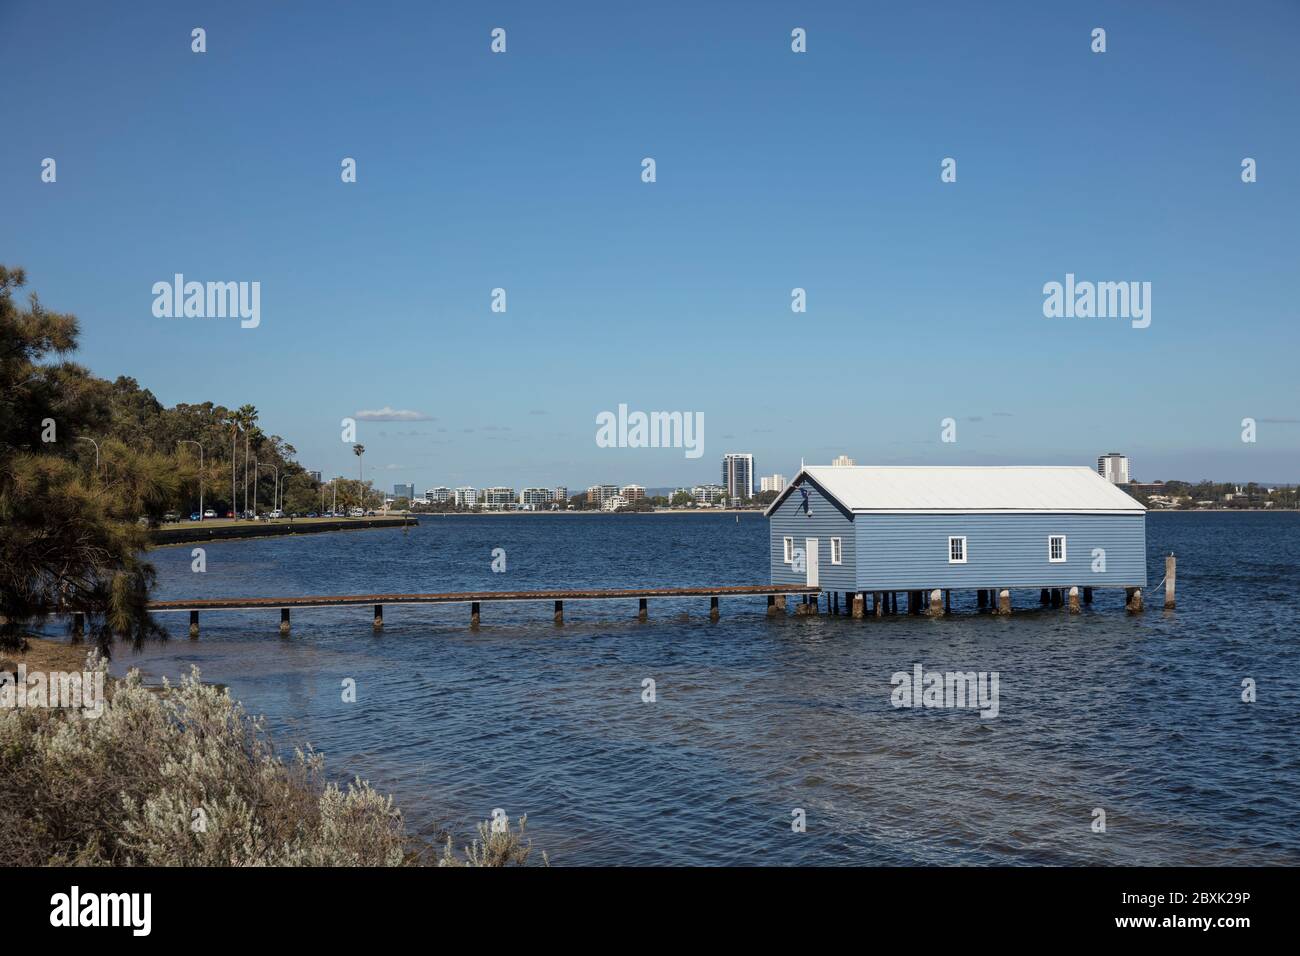 Typical view of the iconic Crawley Edge boatshed in Perth, Western Australia Stock Photo